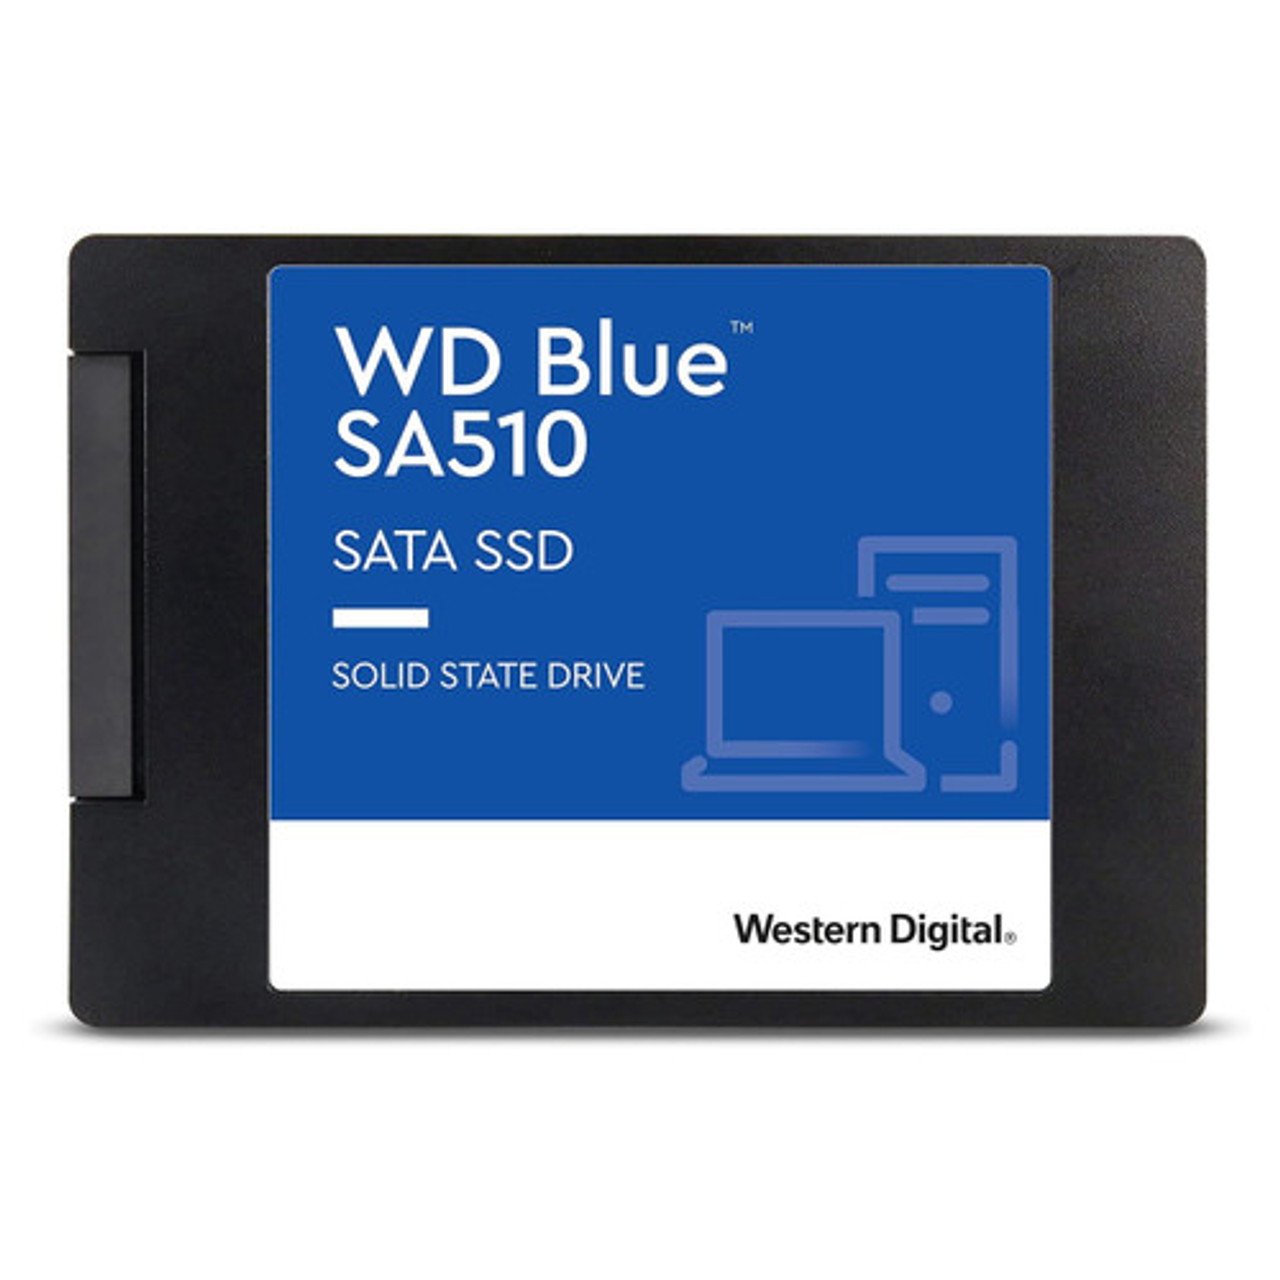 WD Blue SN580 WDS100T3B0E - SSD - 1 TB - PCIe 4.0 x4 (NVMe) - WDS100T3B0E - Solid  State Drives 